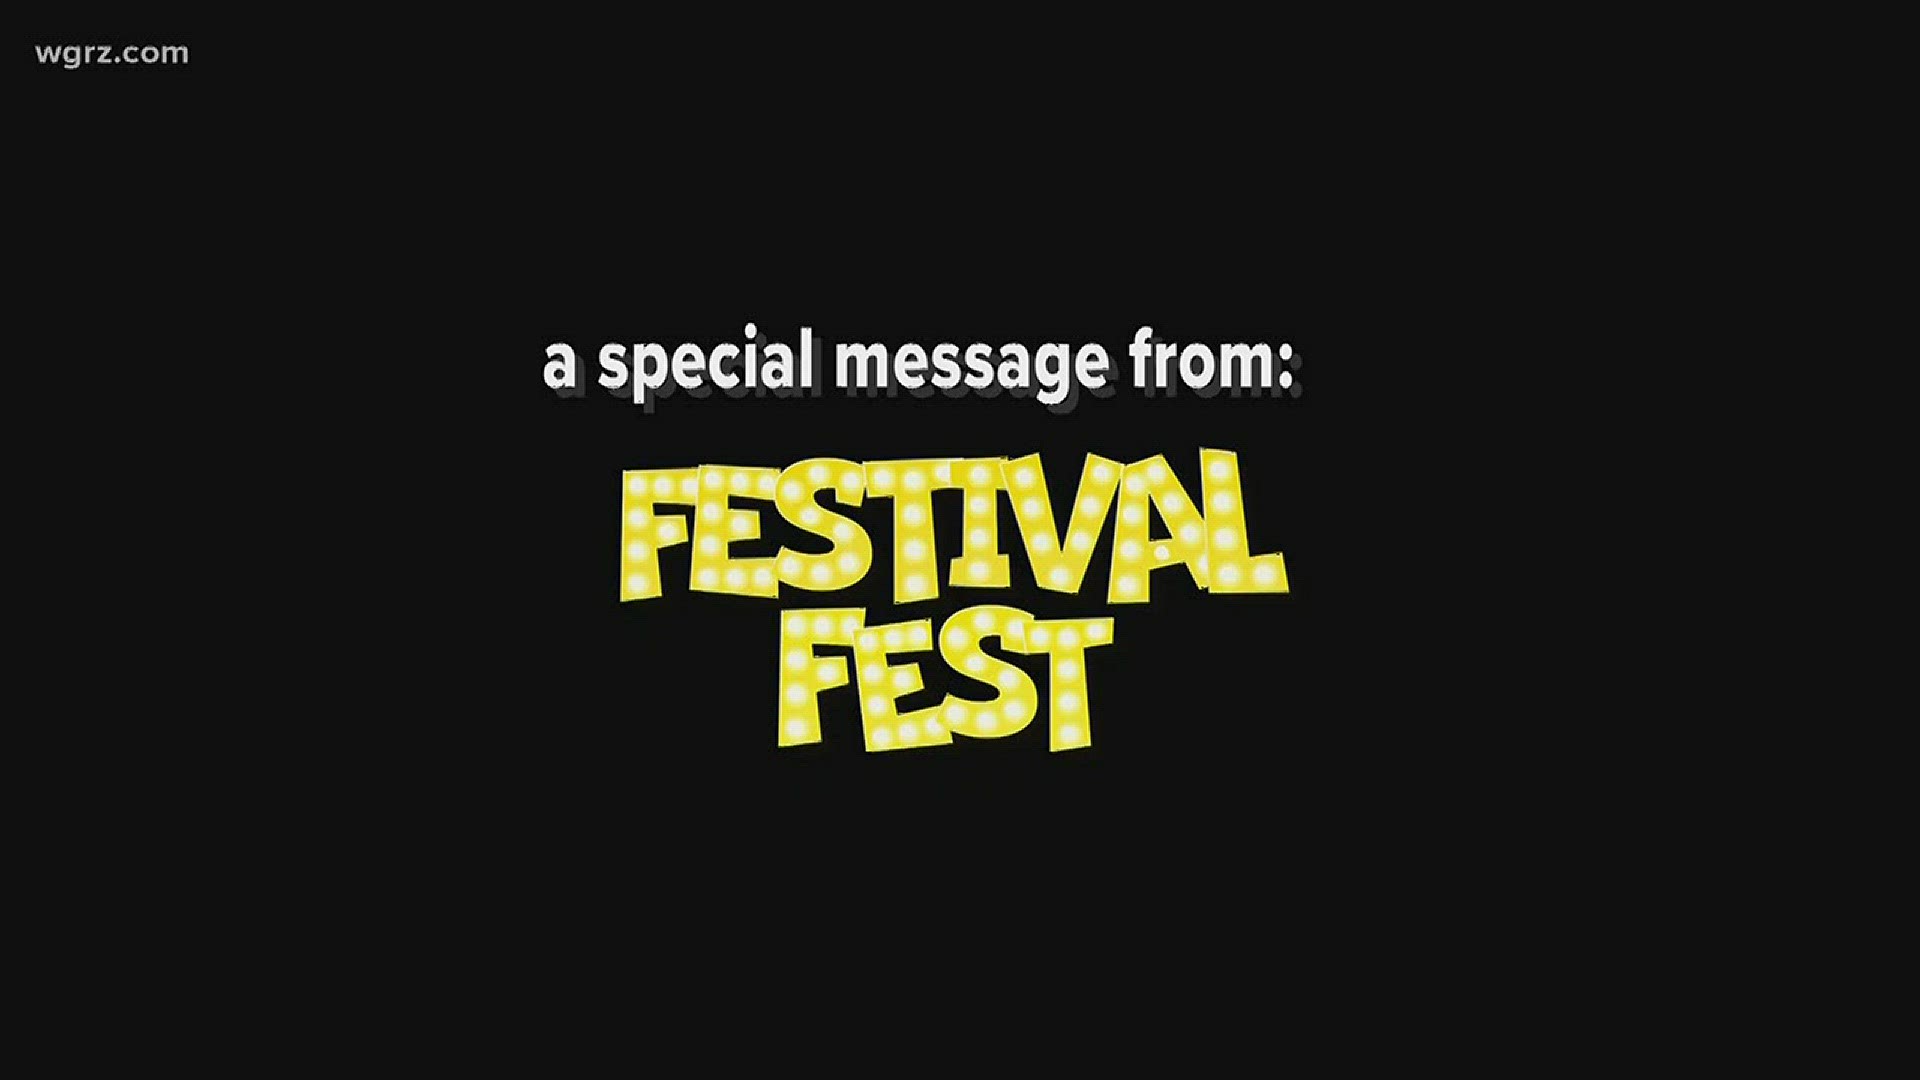 A special message from Festival Fest